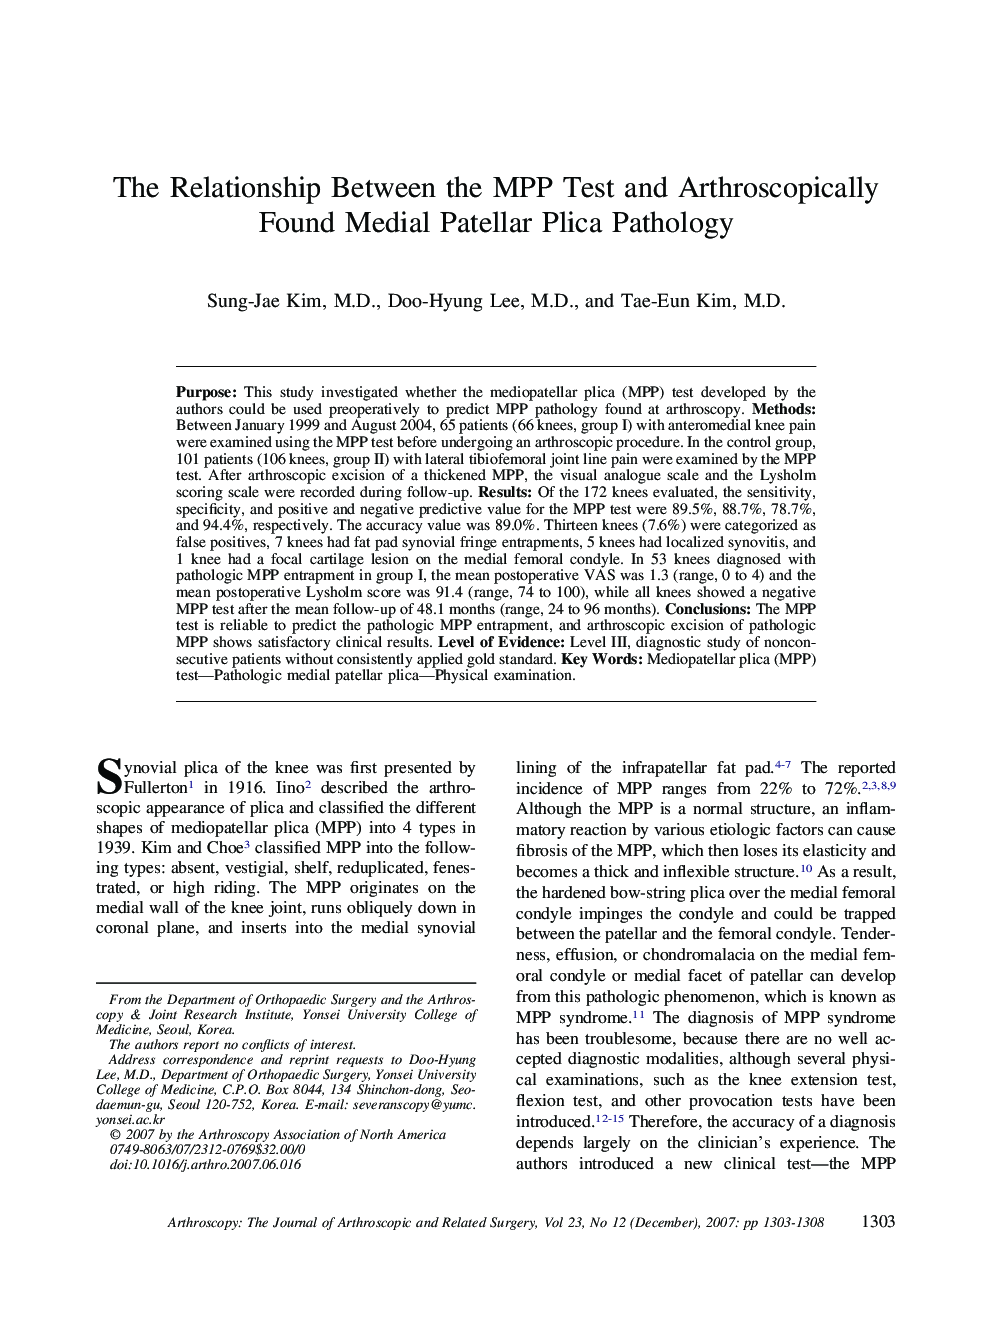 The Relationship Between the MPP Test and Arthroscopically Found Medial Patellar Plica Pathology 